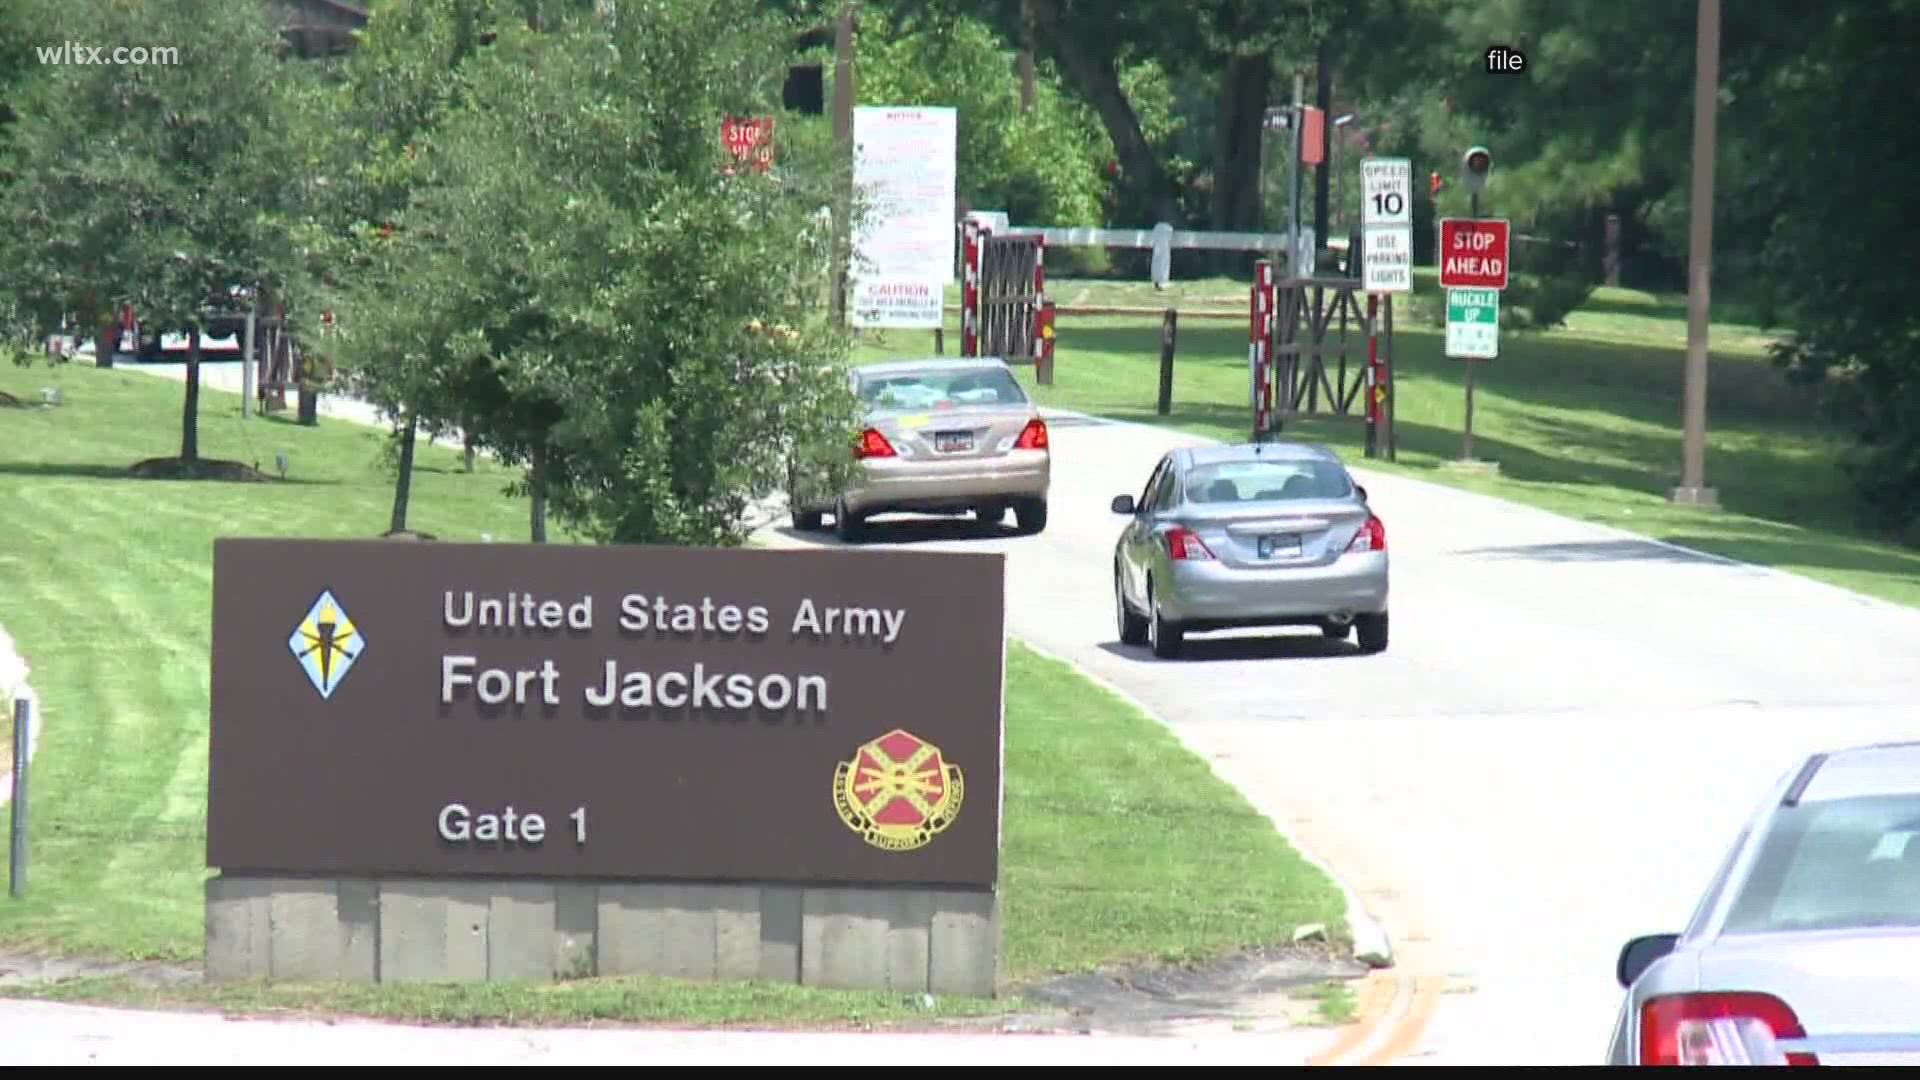 Fort officials said Private Danielle A. Shields, 18, of Decatur, Georgia was found unresponsive in her barracks on October 7.